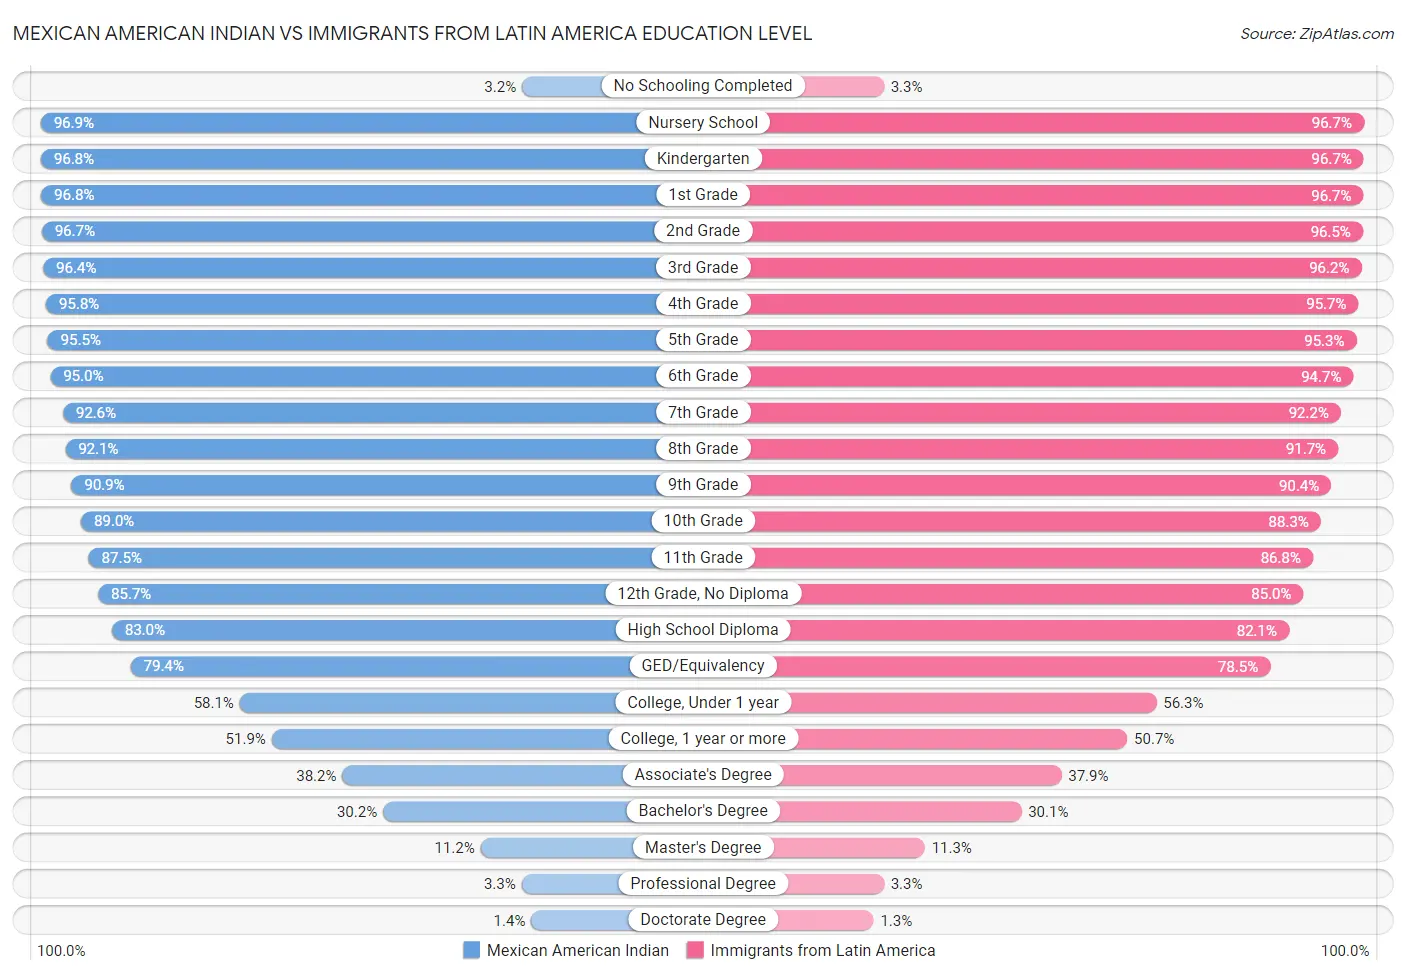 Mexican American Indian vs Immigrants from Latin America Education Level